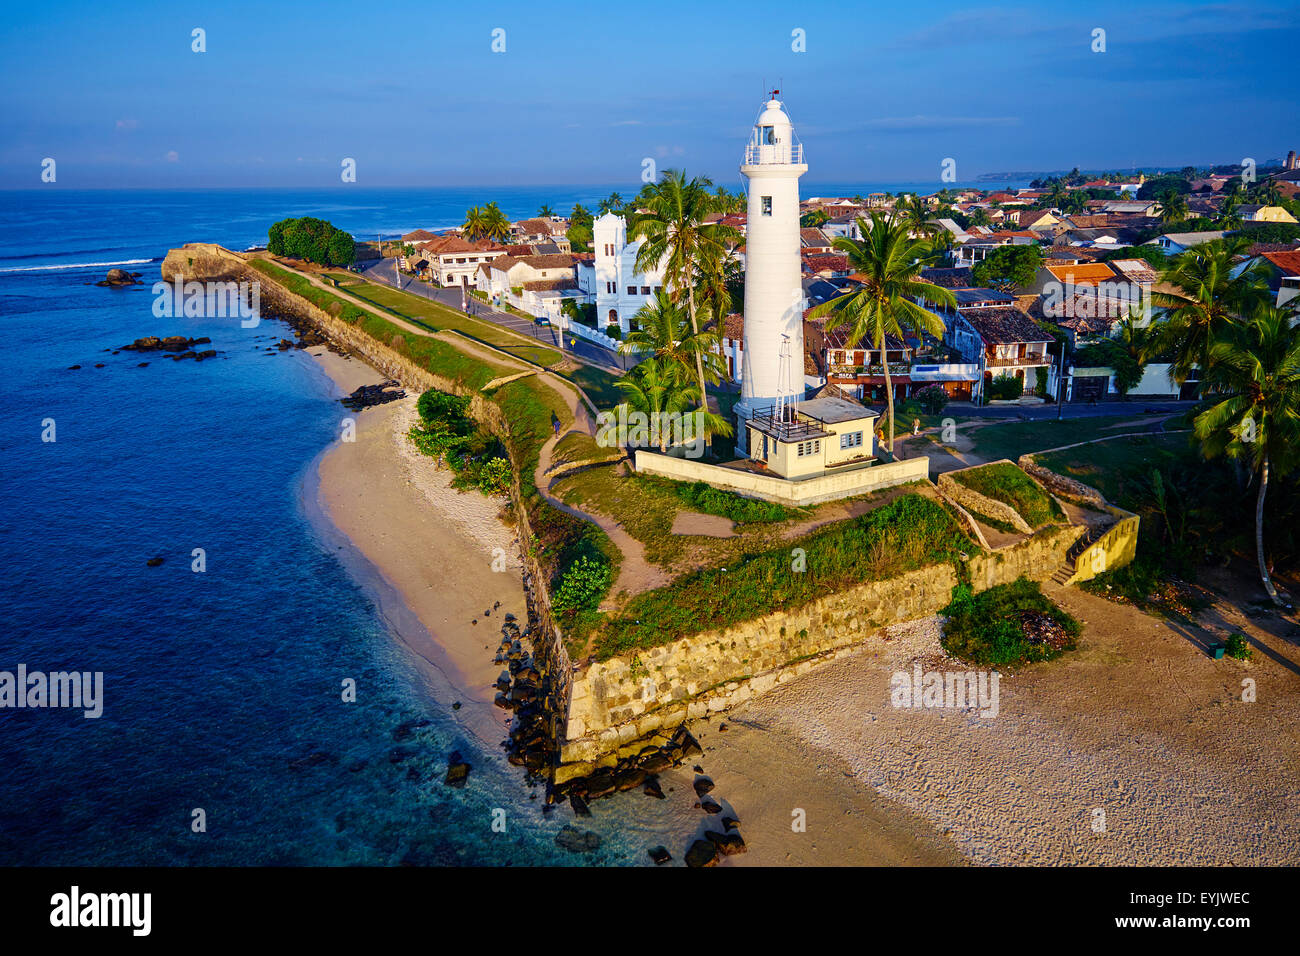 Sri Lanka, Southern Province, South Coast beach, Galle town, Dutch fort, UNESCO World Heritage site, aerial view Stock Photo